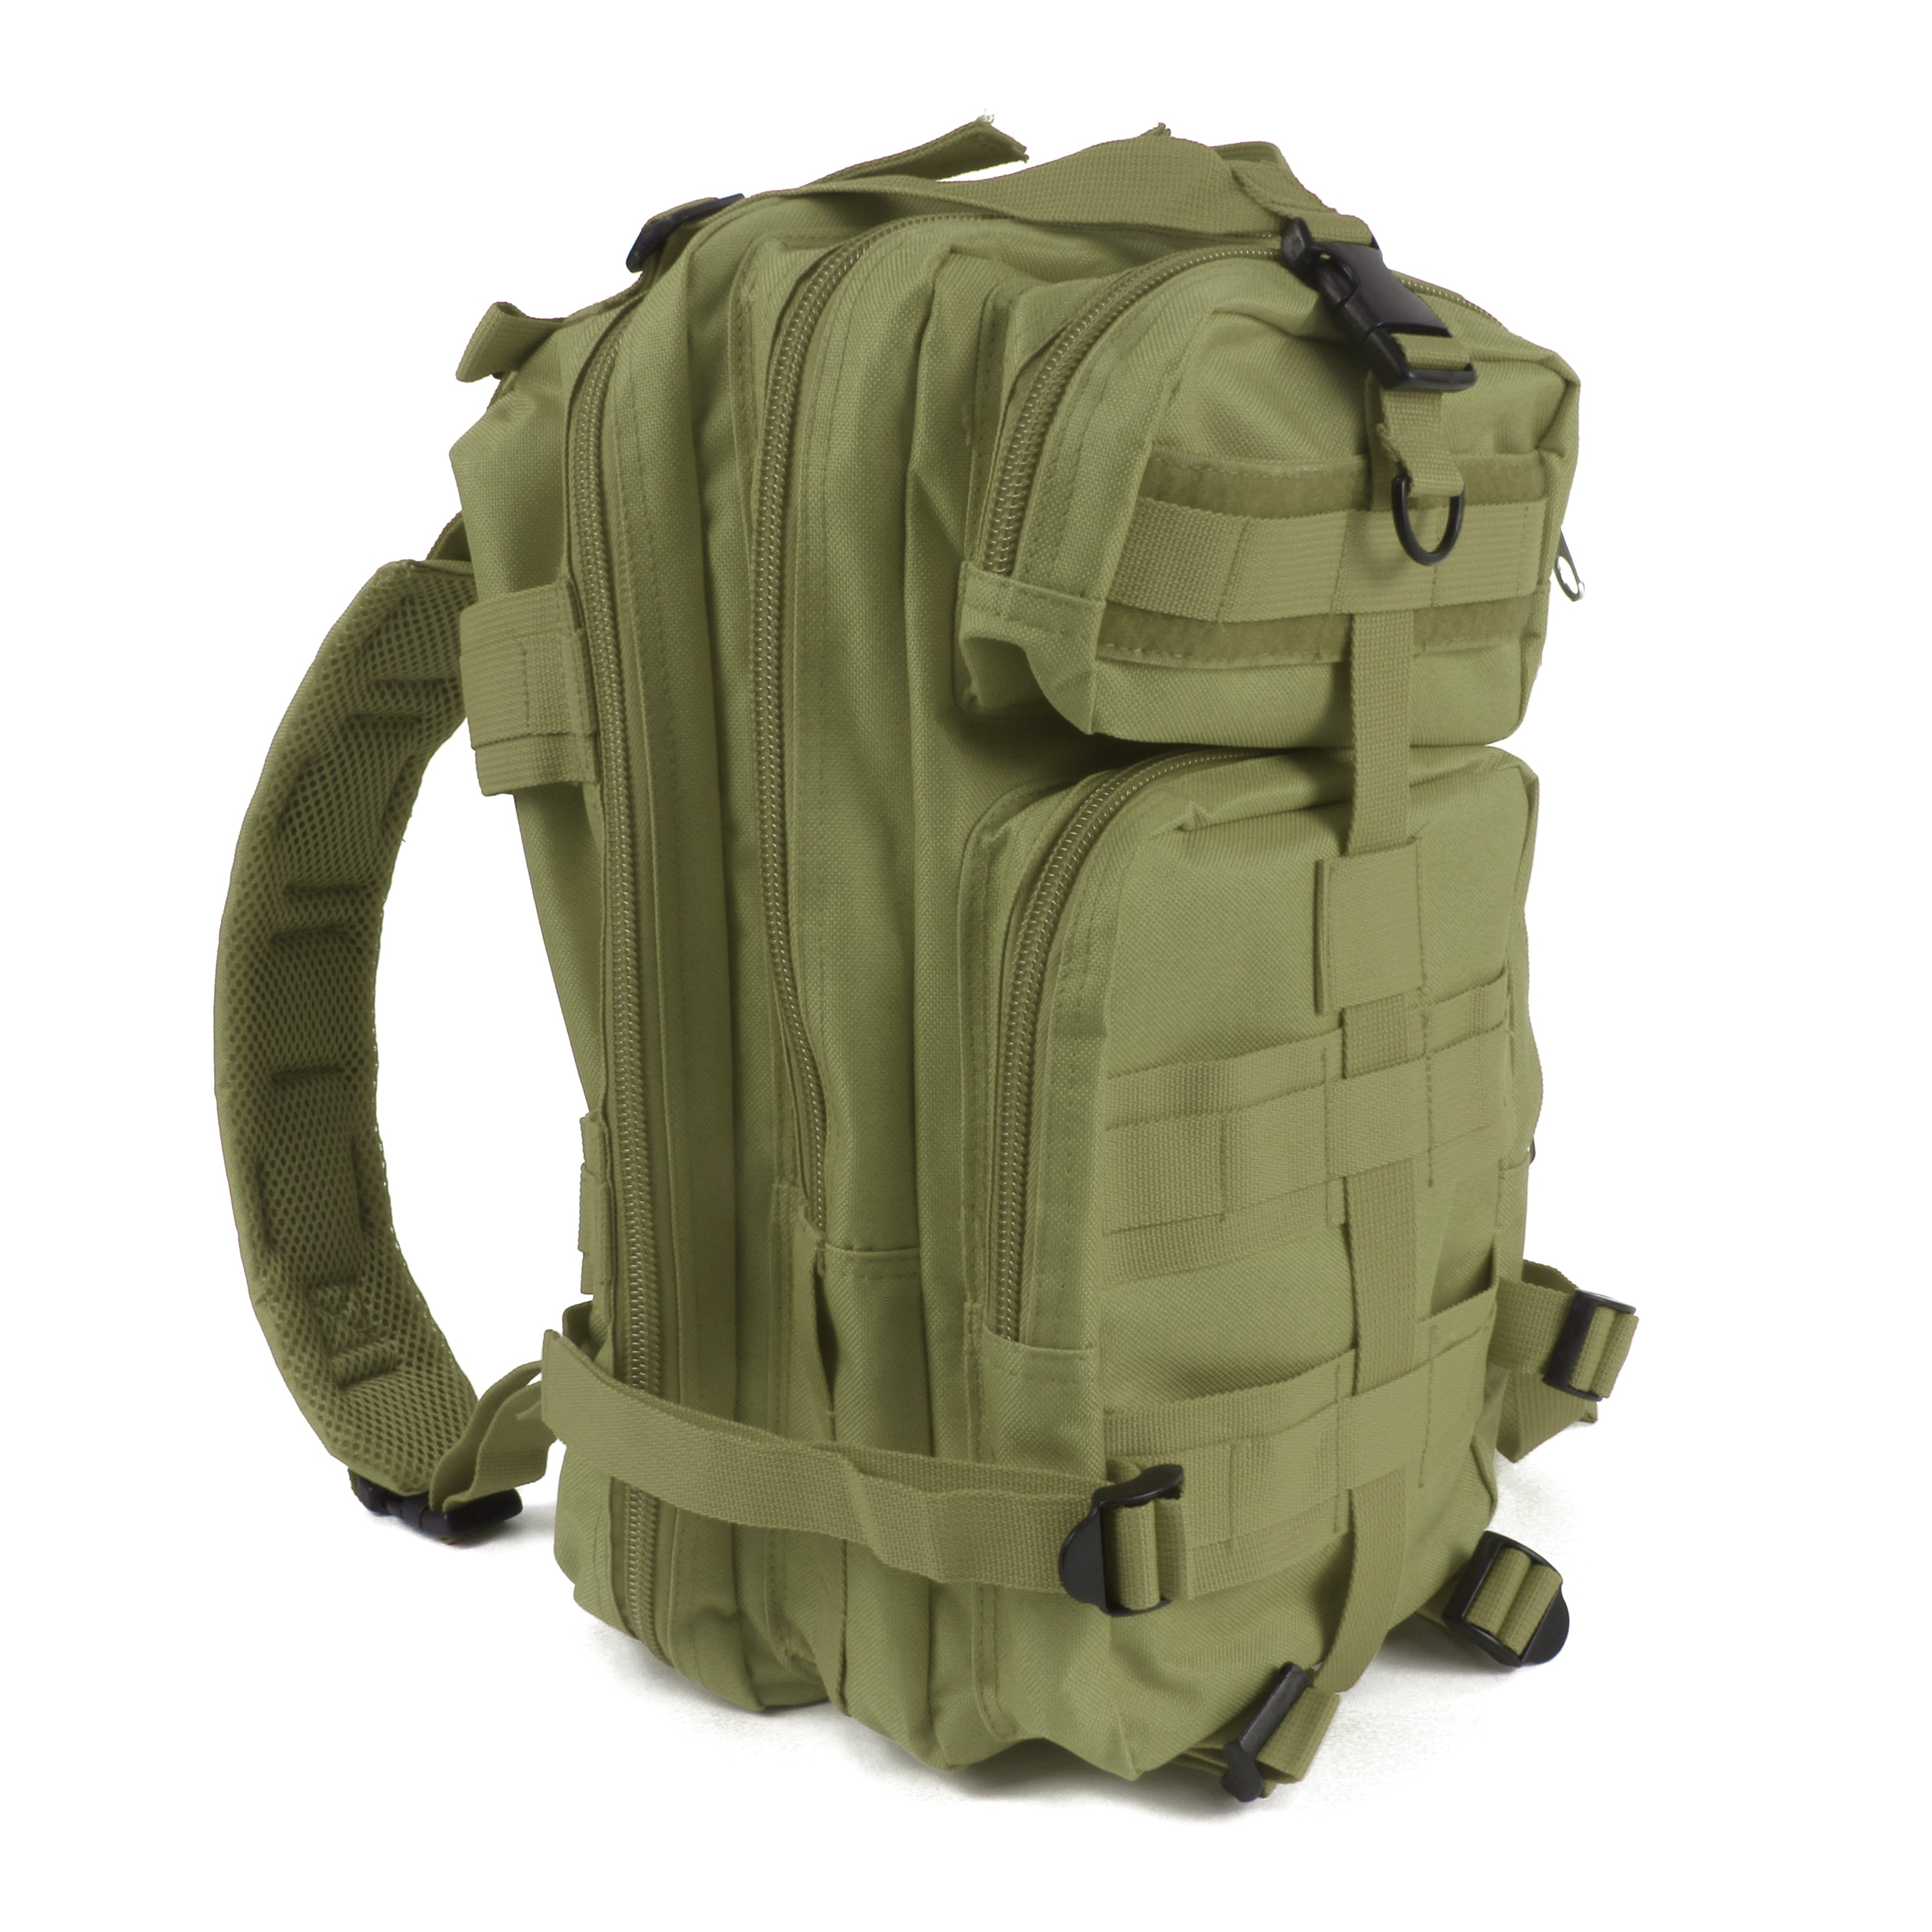 MediTac Tactical Assault Pack - First Aid Rucksack - 18" Military MOLLE Backpack